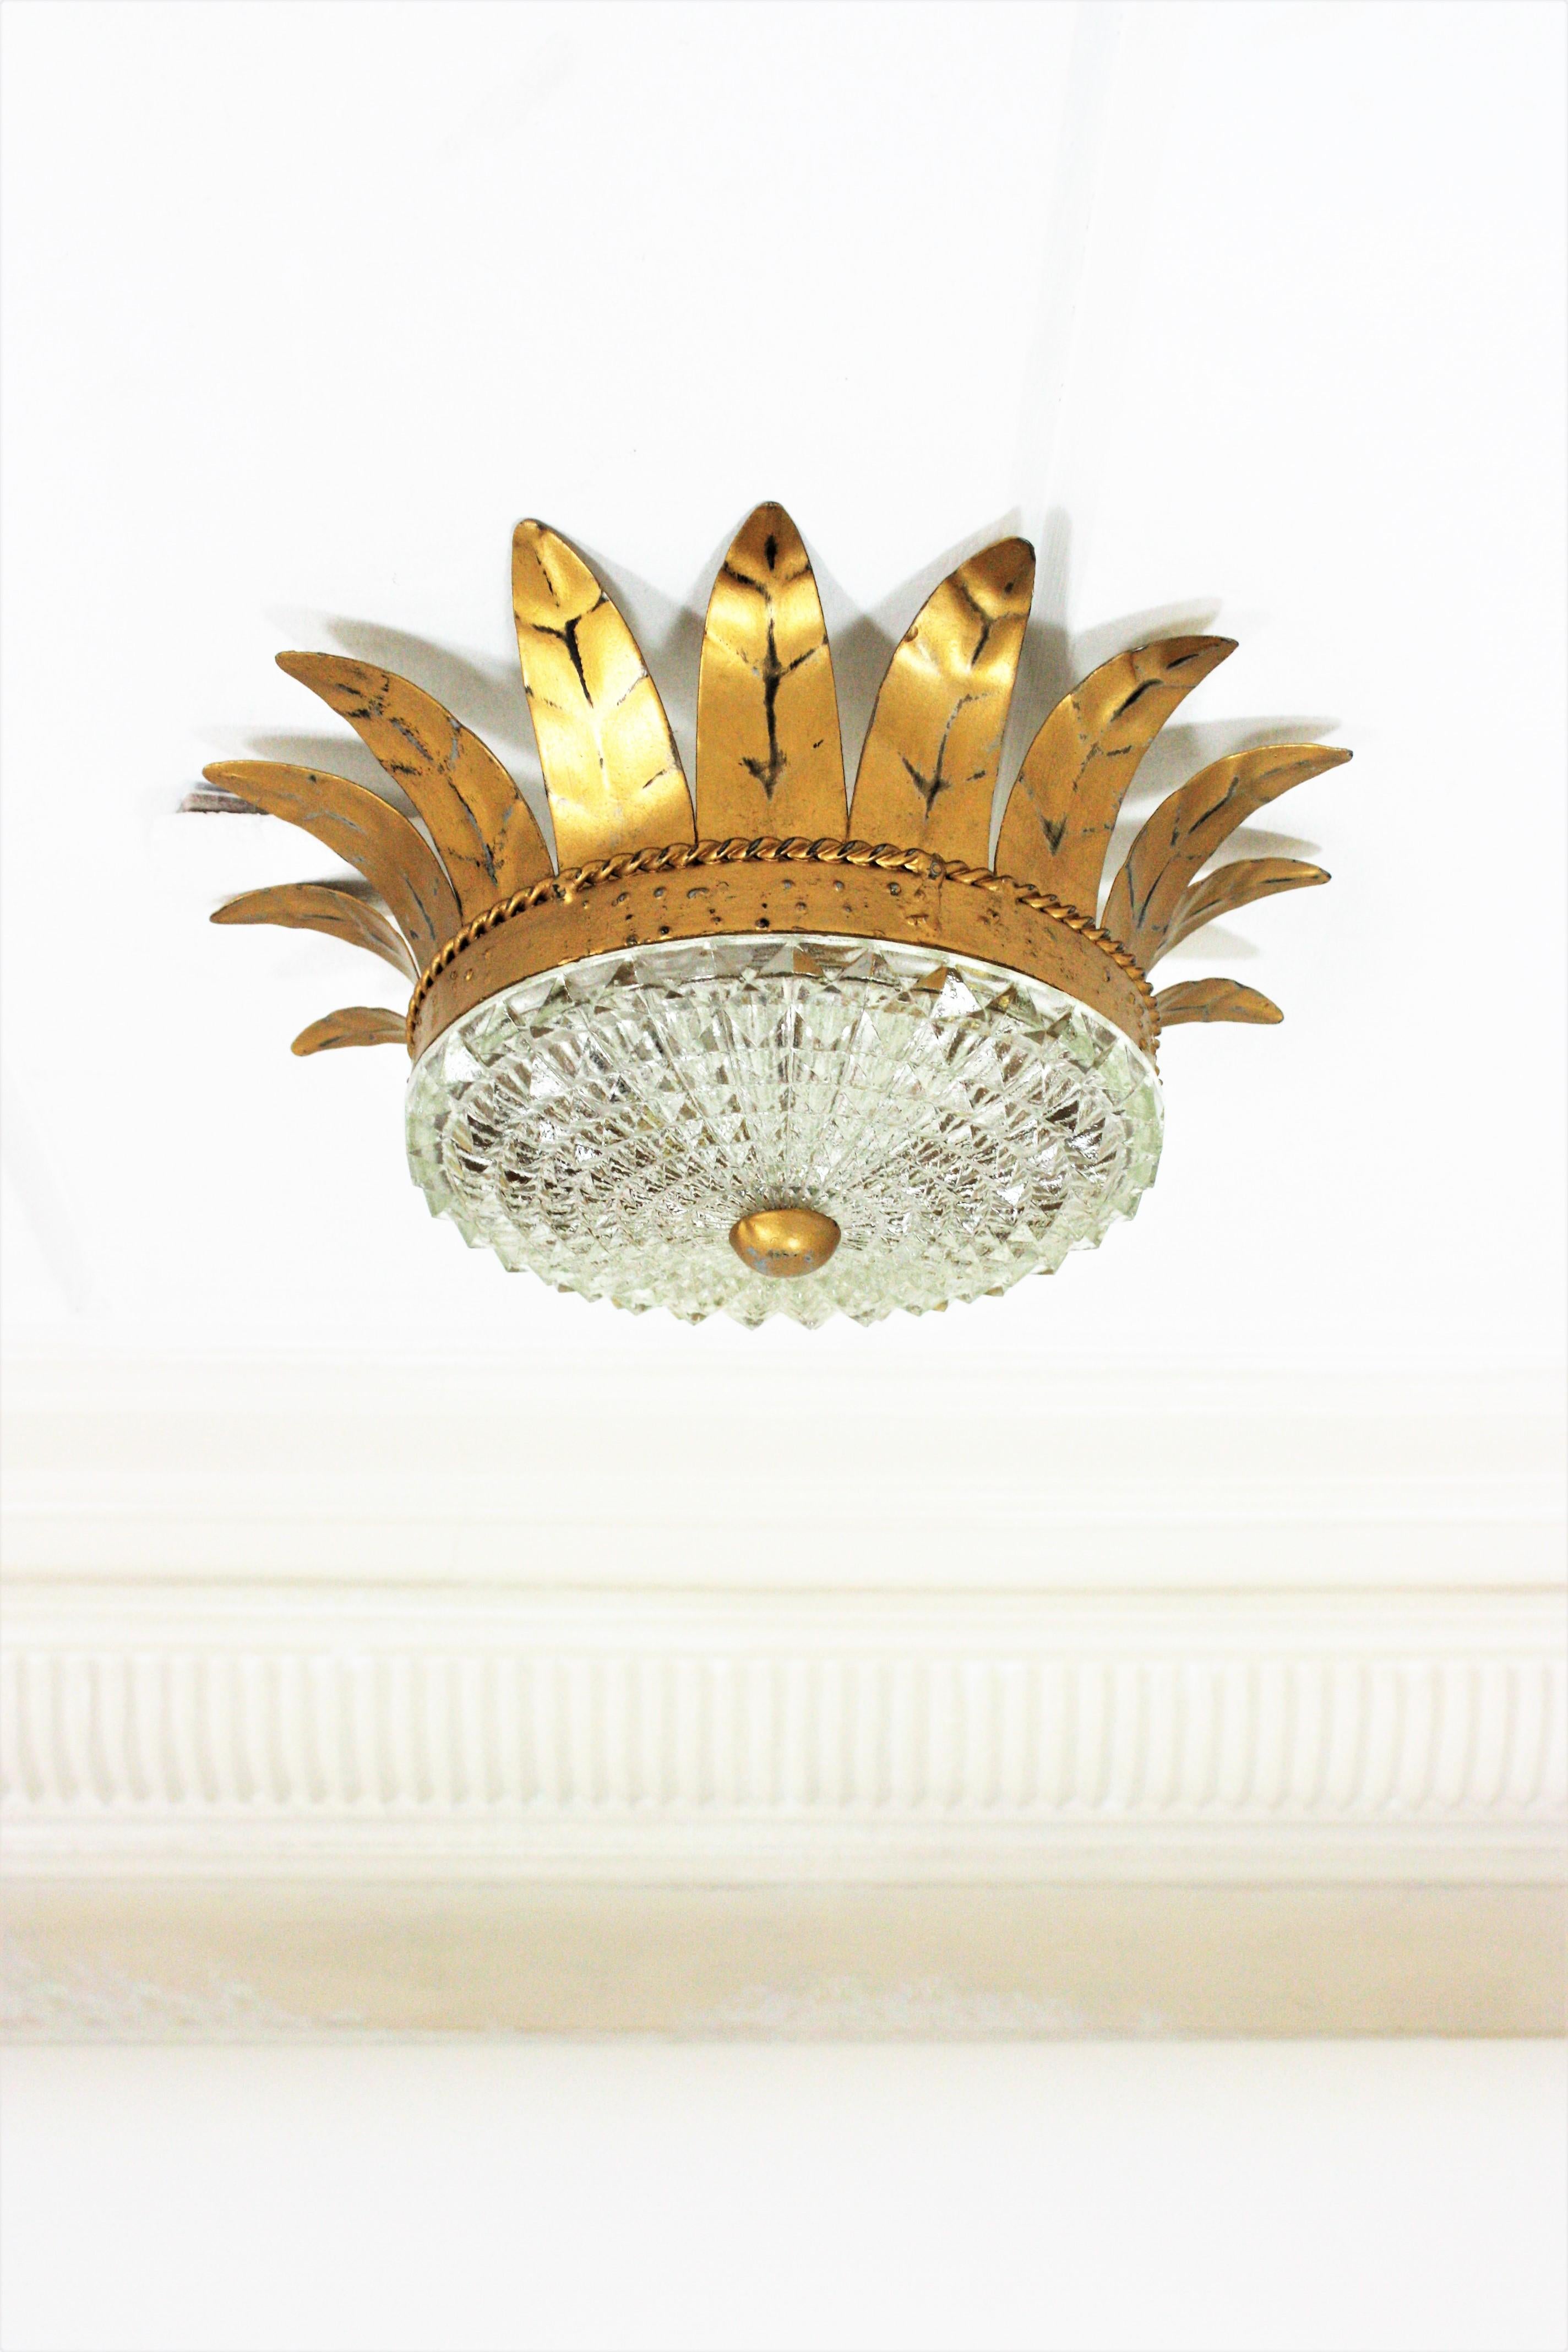 Metal Sunburst Crown Light Fixture in Gilt Iron and Glass, 1950s For Sale